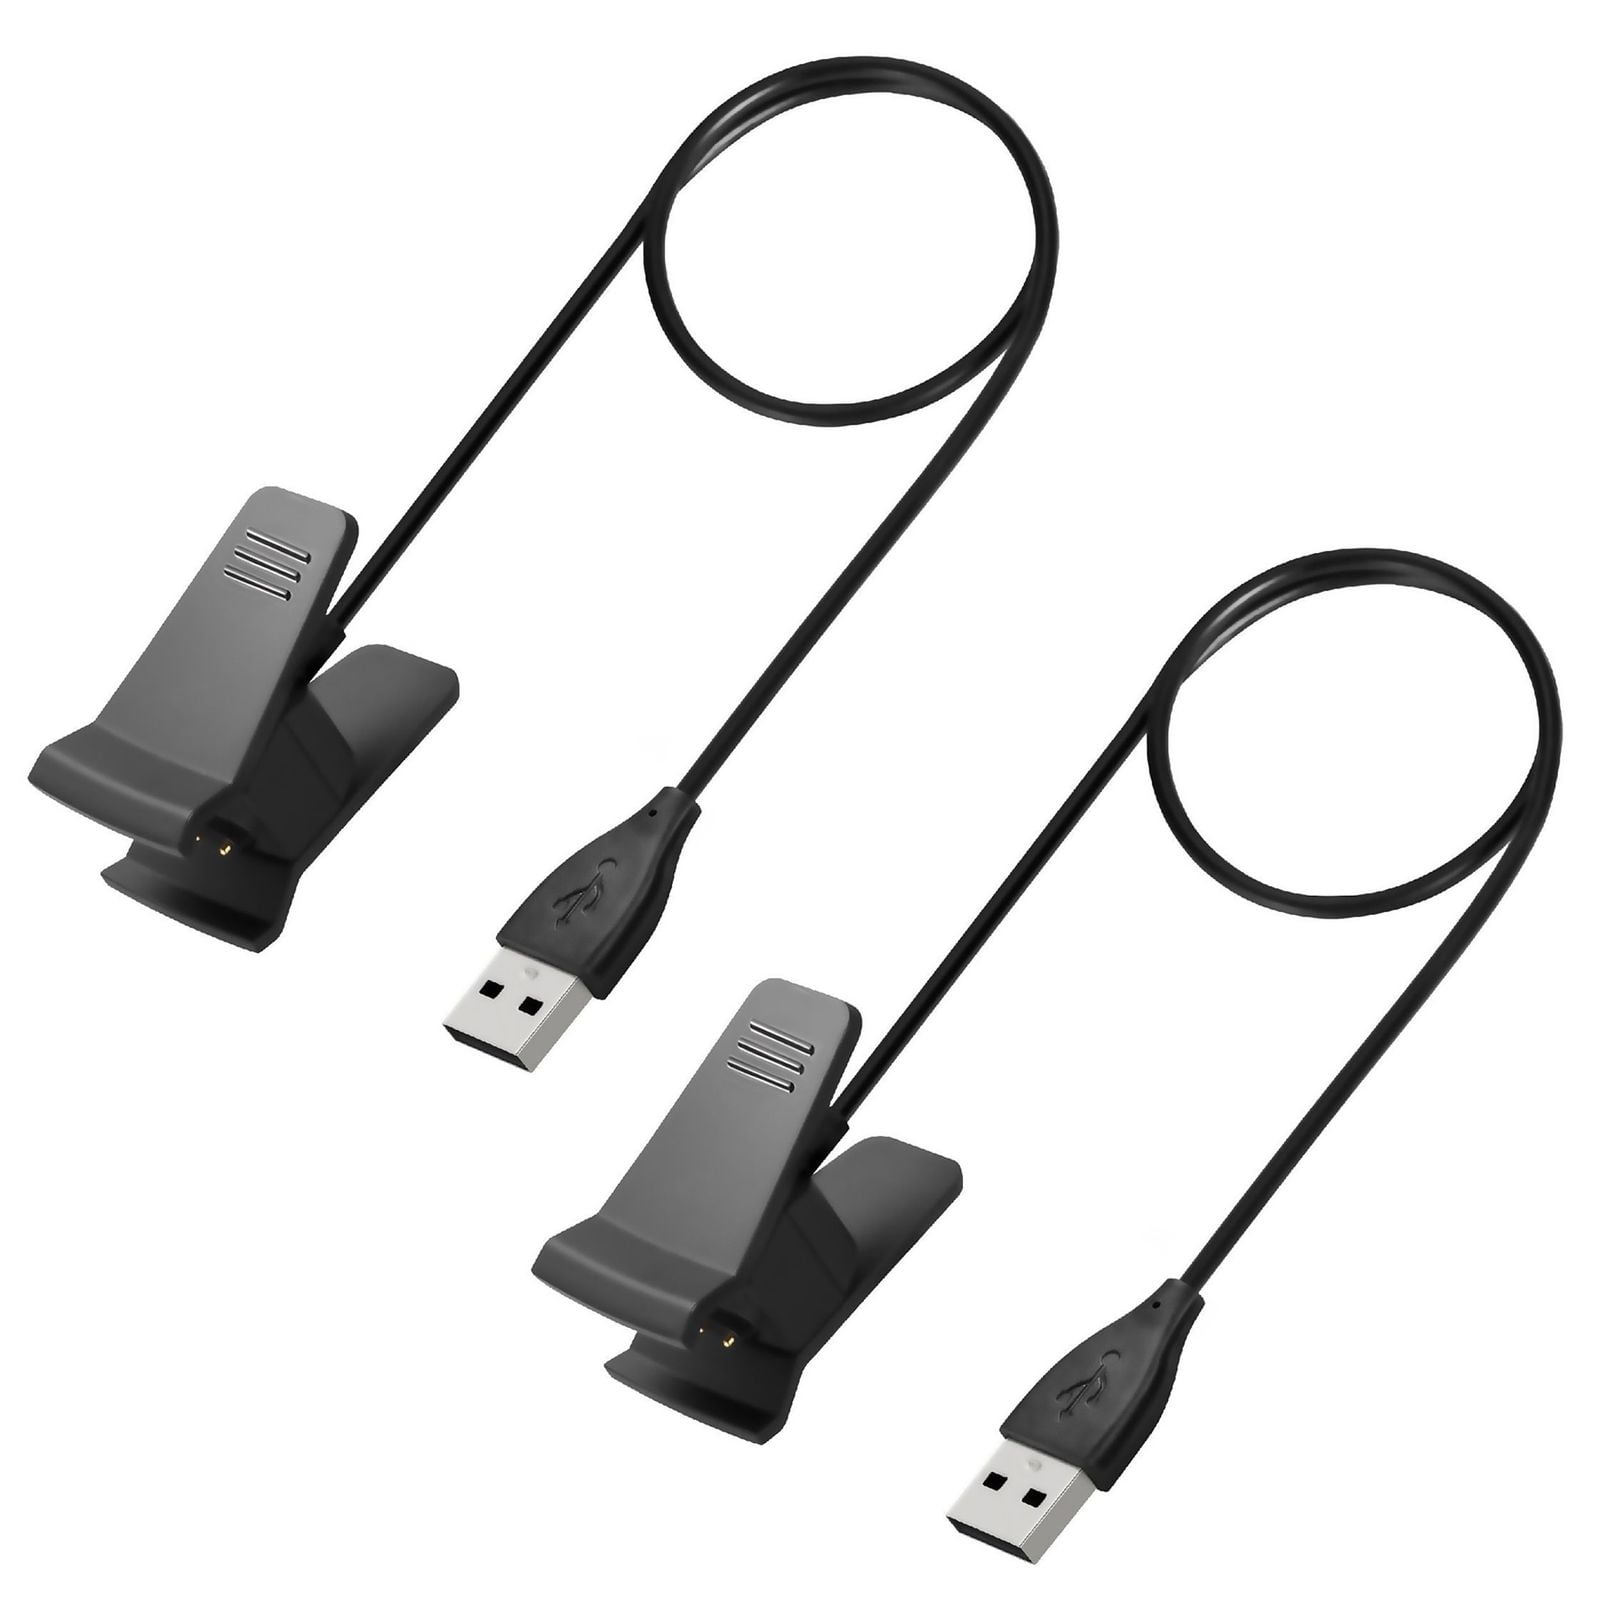 Replacement USB Cord Charging Dock Cable for Fitbit Charge 2 Activity Tracker 